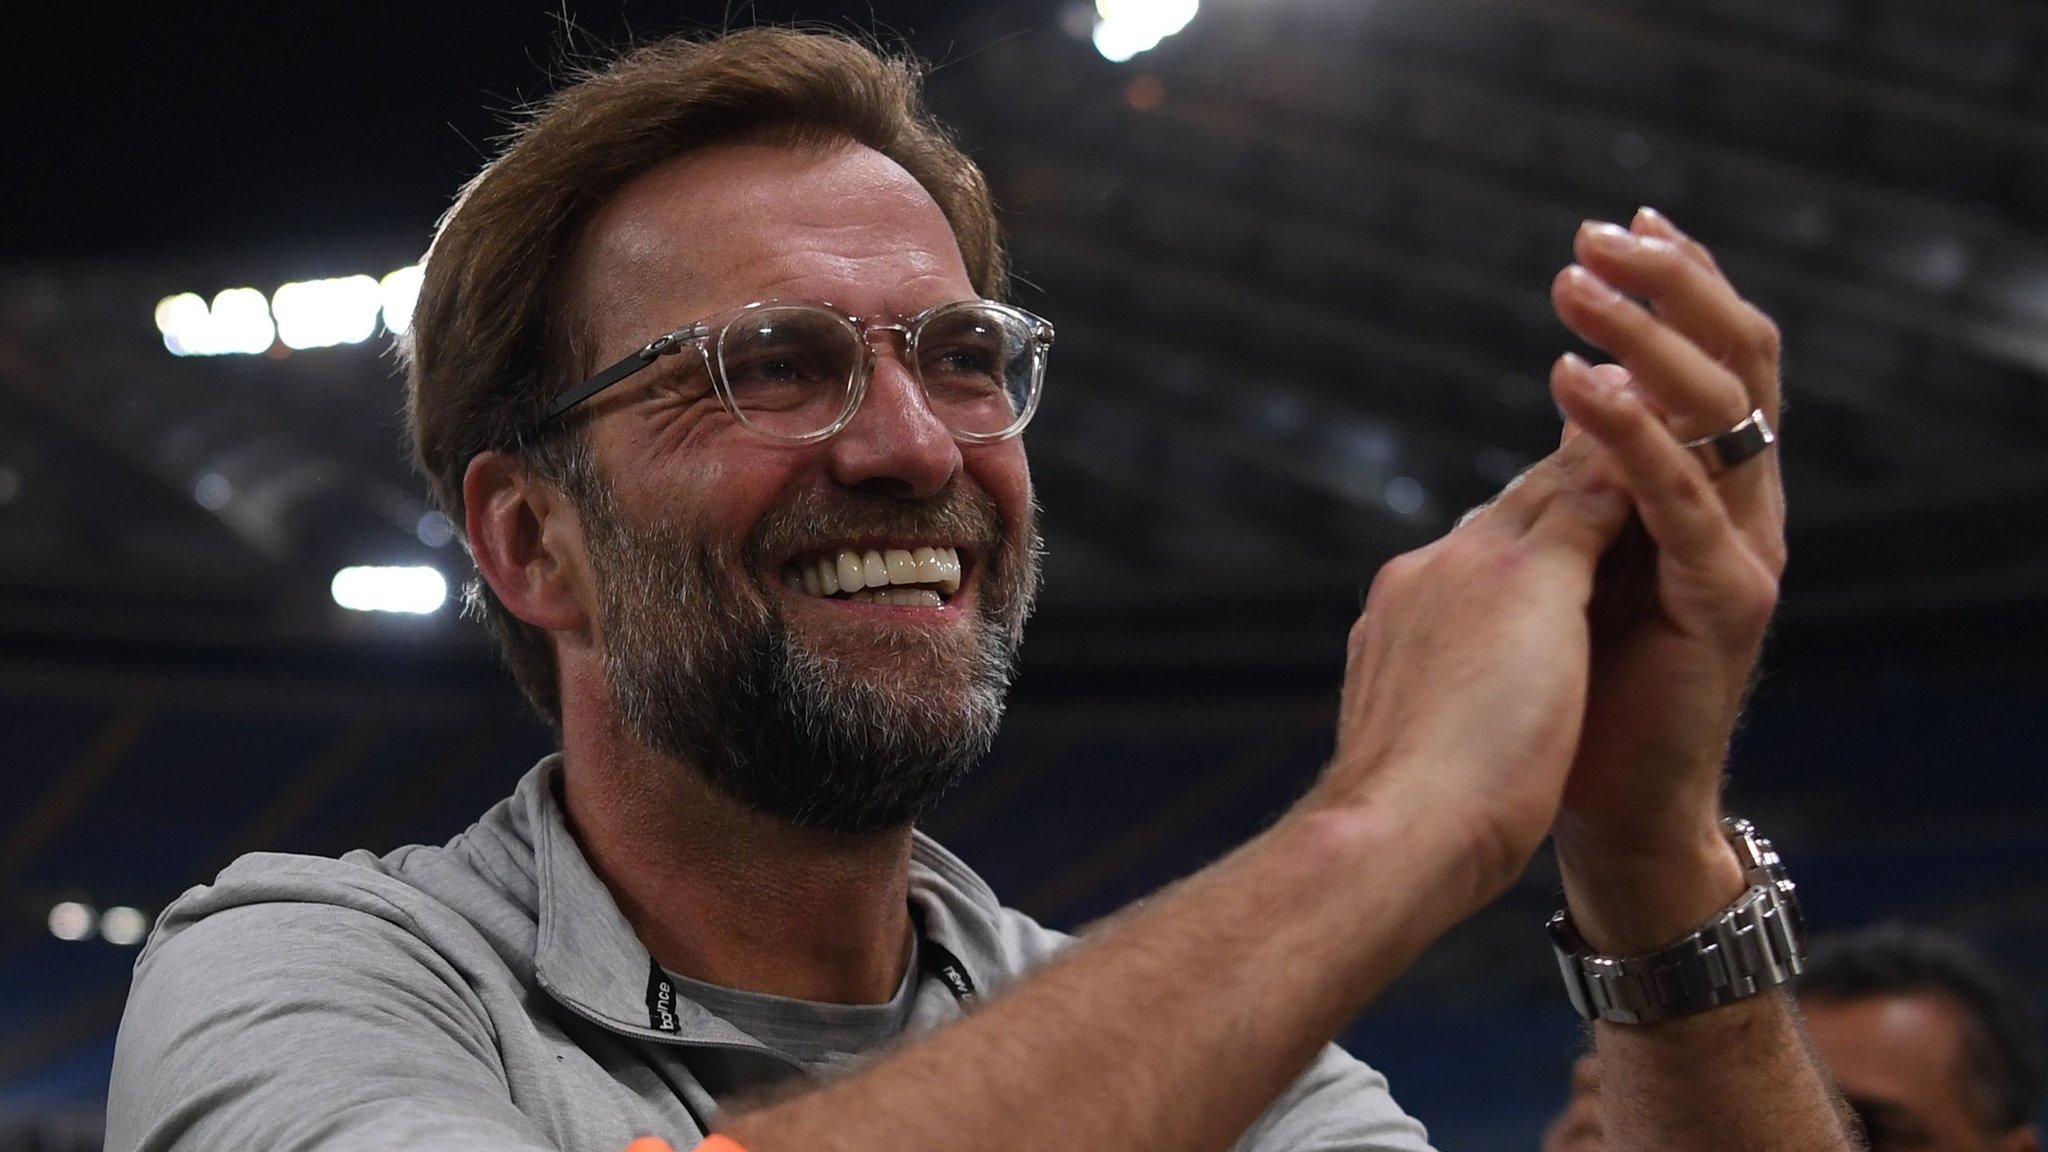 'We are here because we are Liverpool' - Klopp on Champions League final